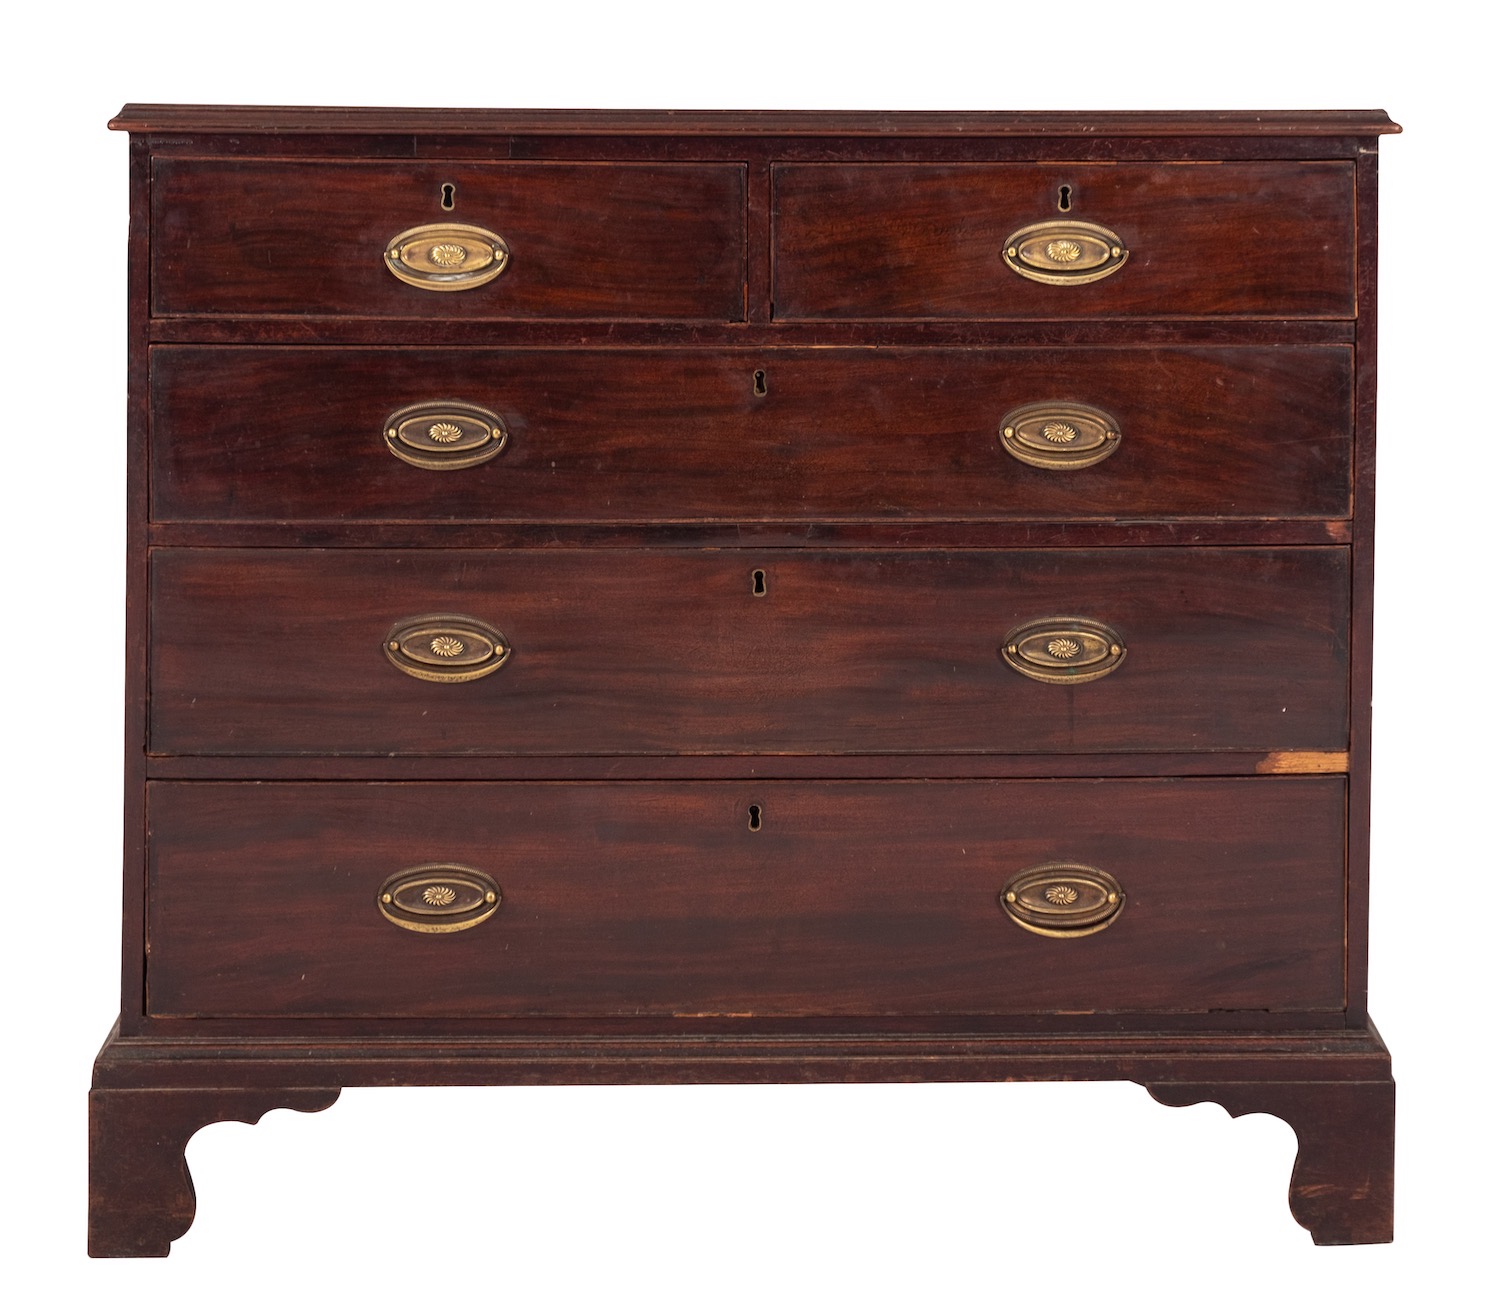 A George III mahogany chest of drawers, late 18th century; the top with moulded edges,